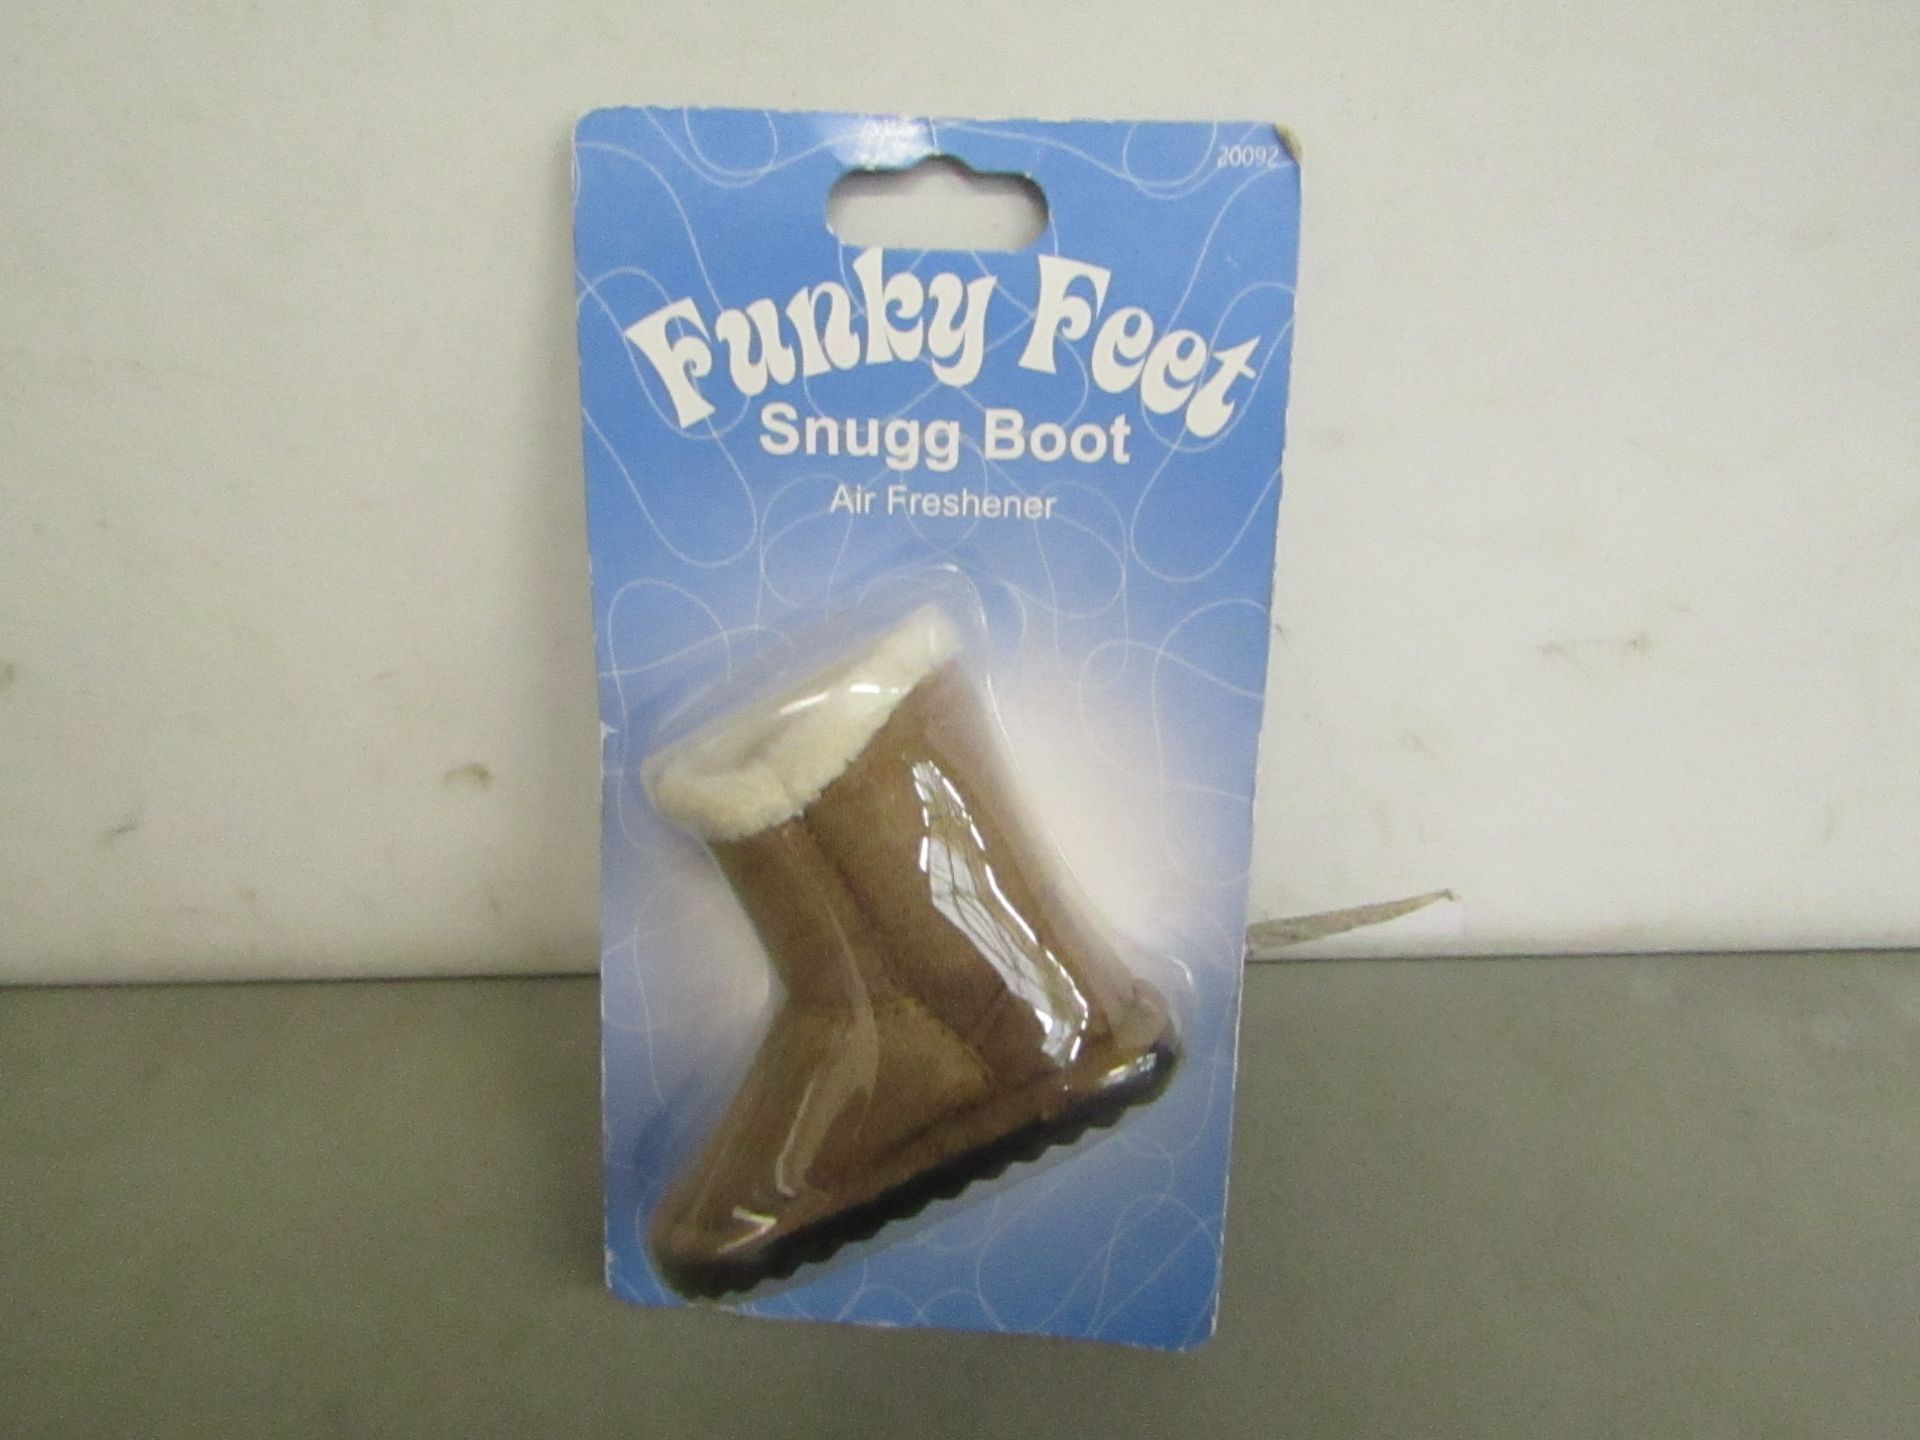 6 x funky feet snugg boot air freshener , new and packaged